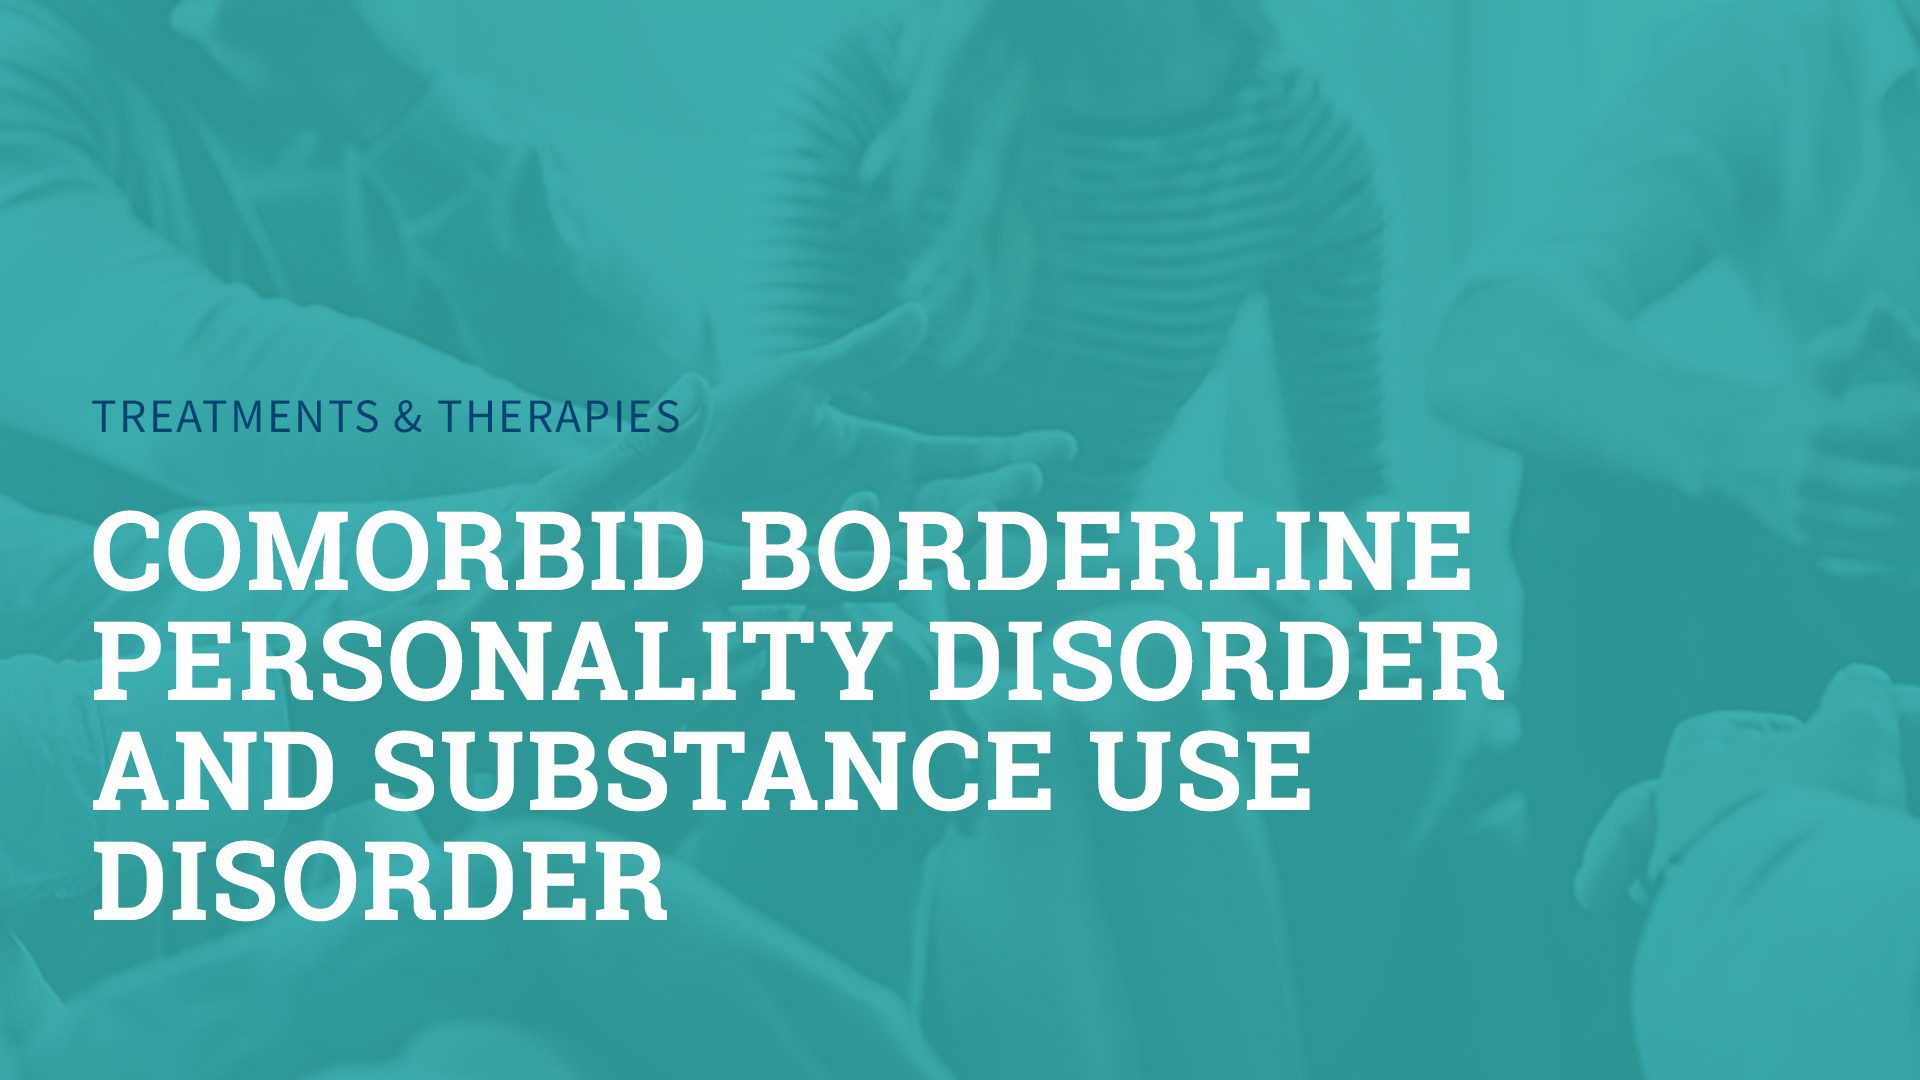 Comorbid Borderline Personality Disorder and Substance Use Disorder